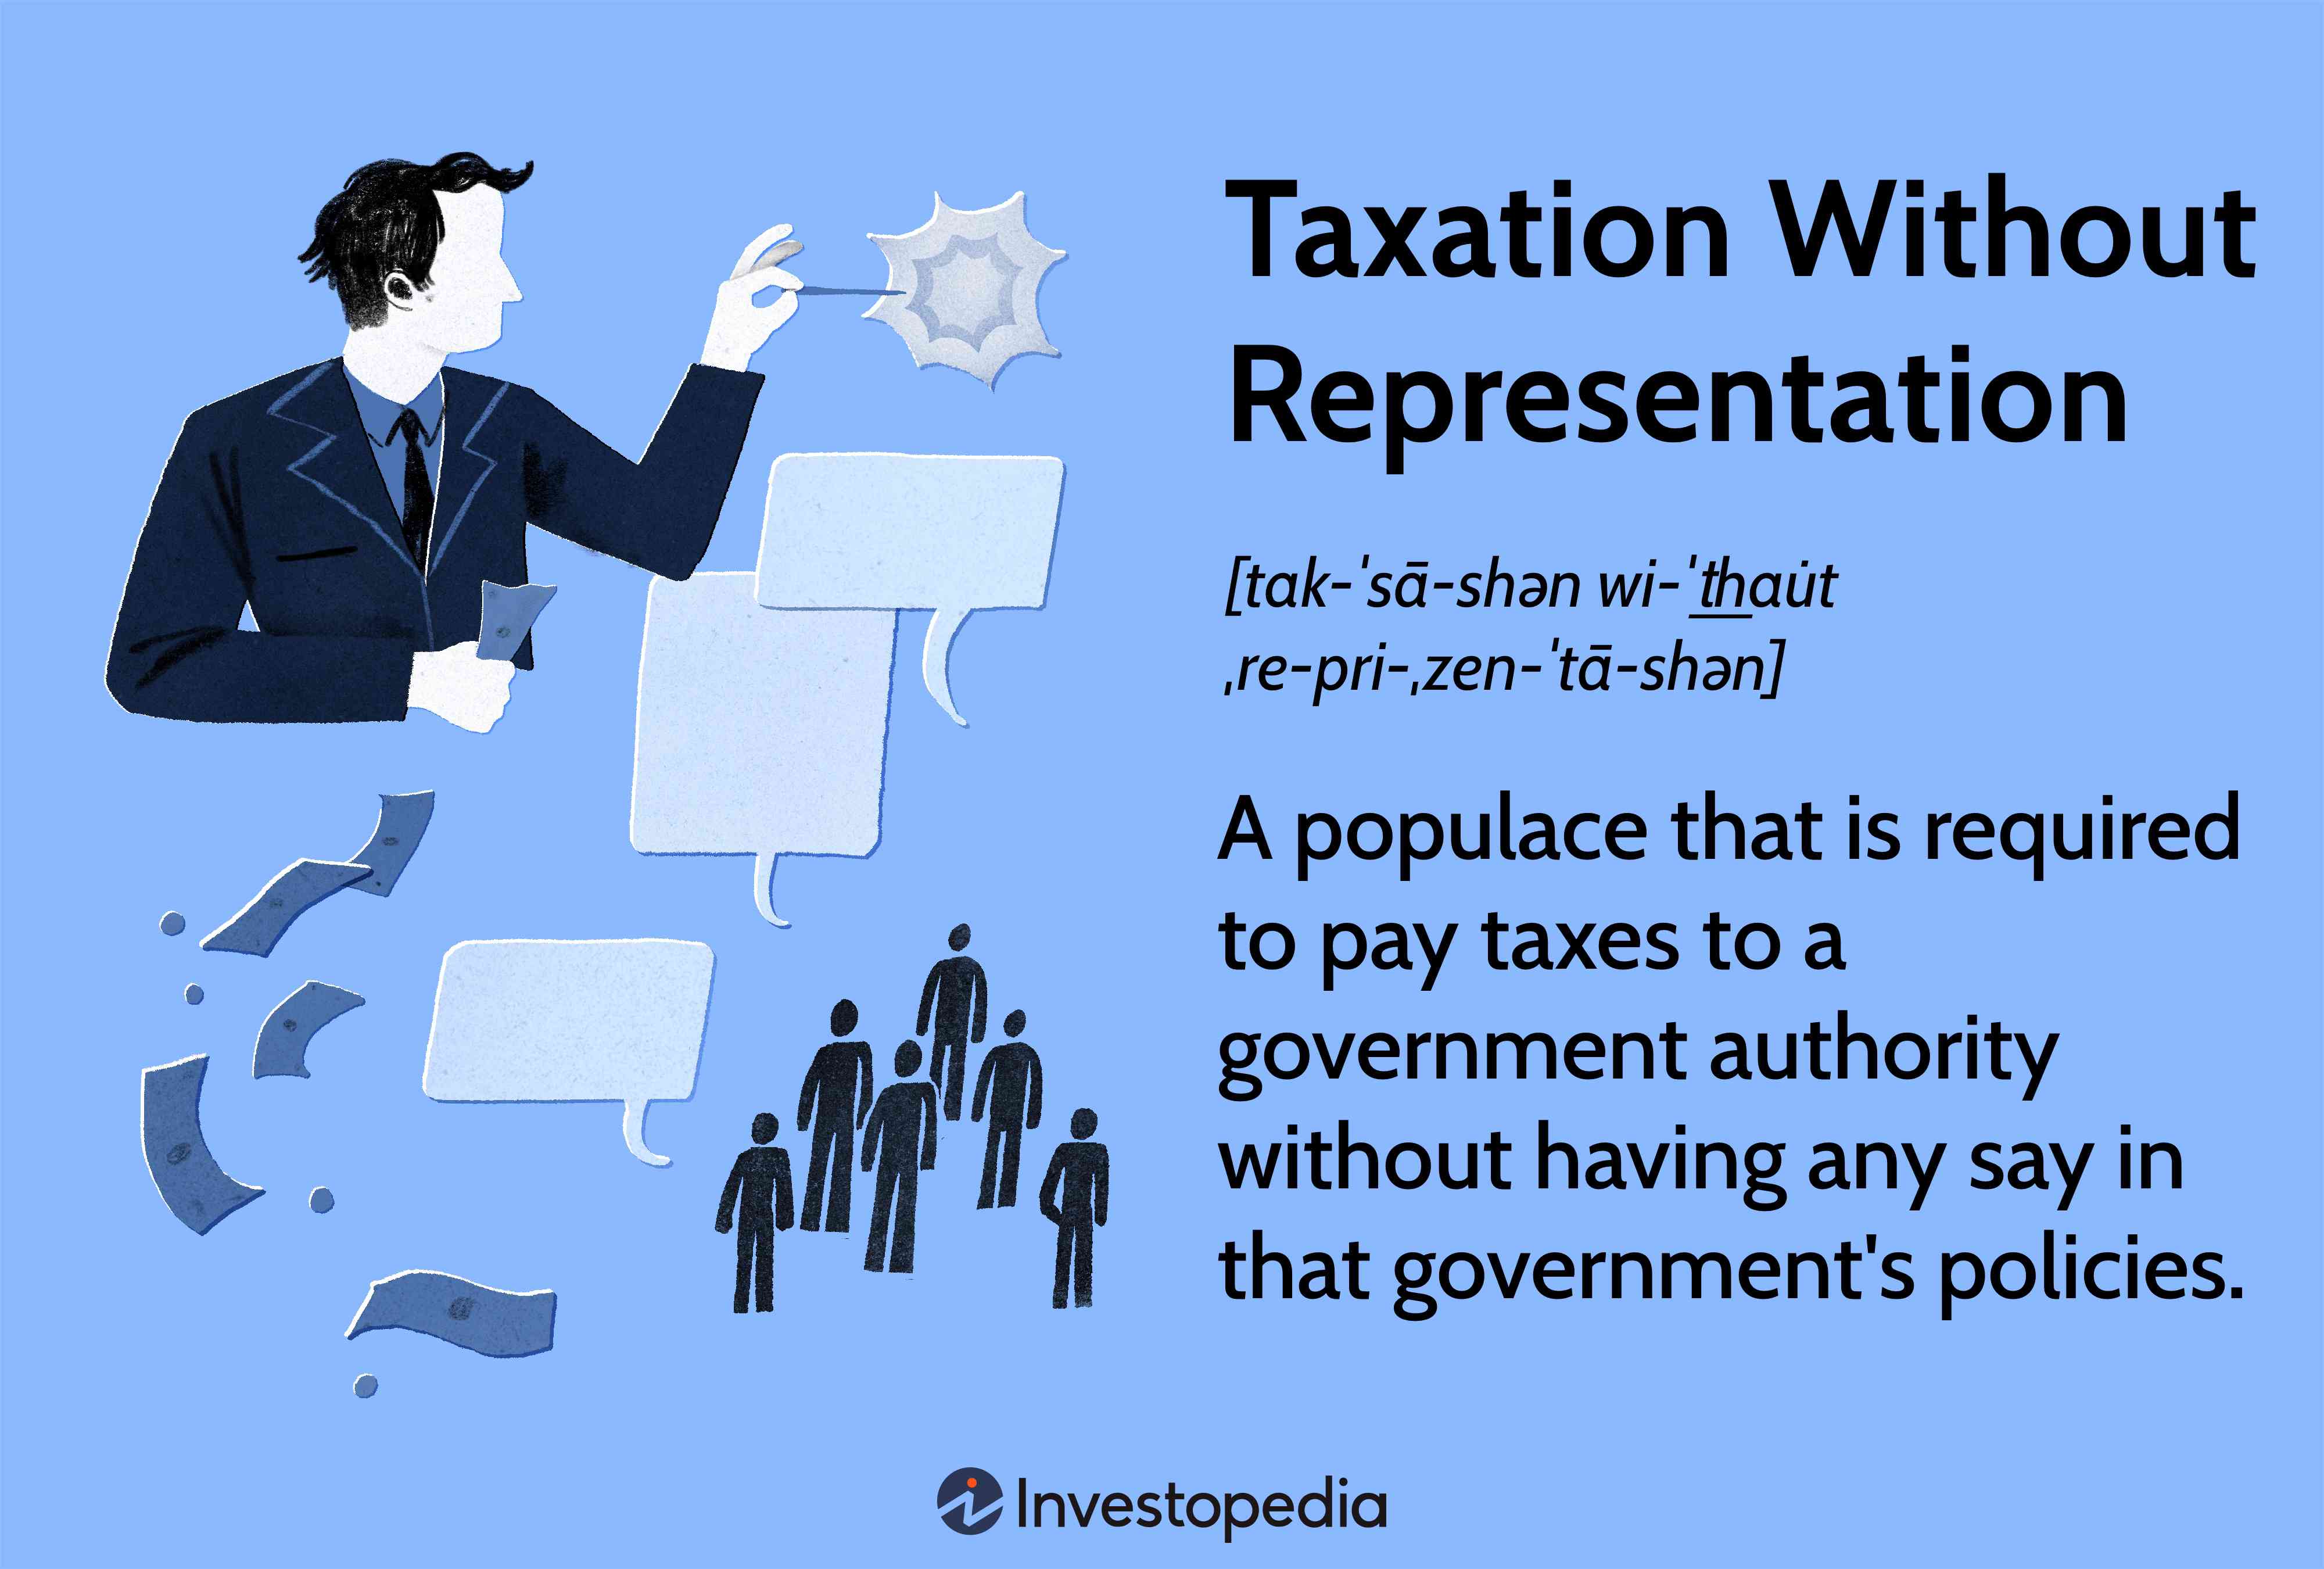 Taxation Without Representation: A populace that is required to pay taxes to a government authority without having any say in that government's policies.